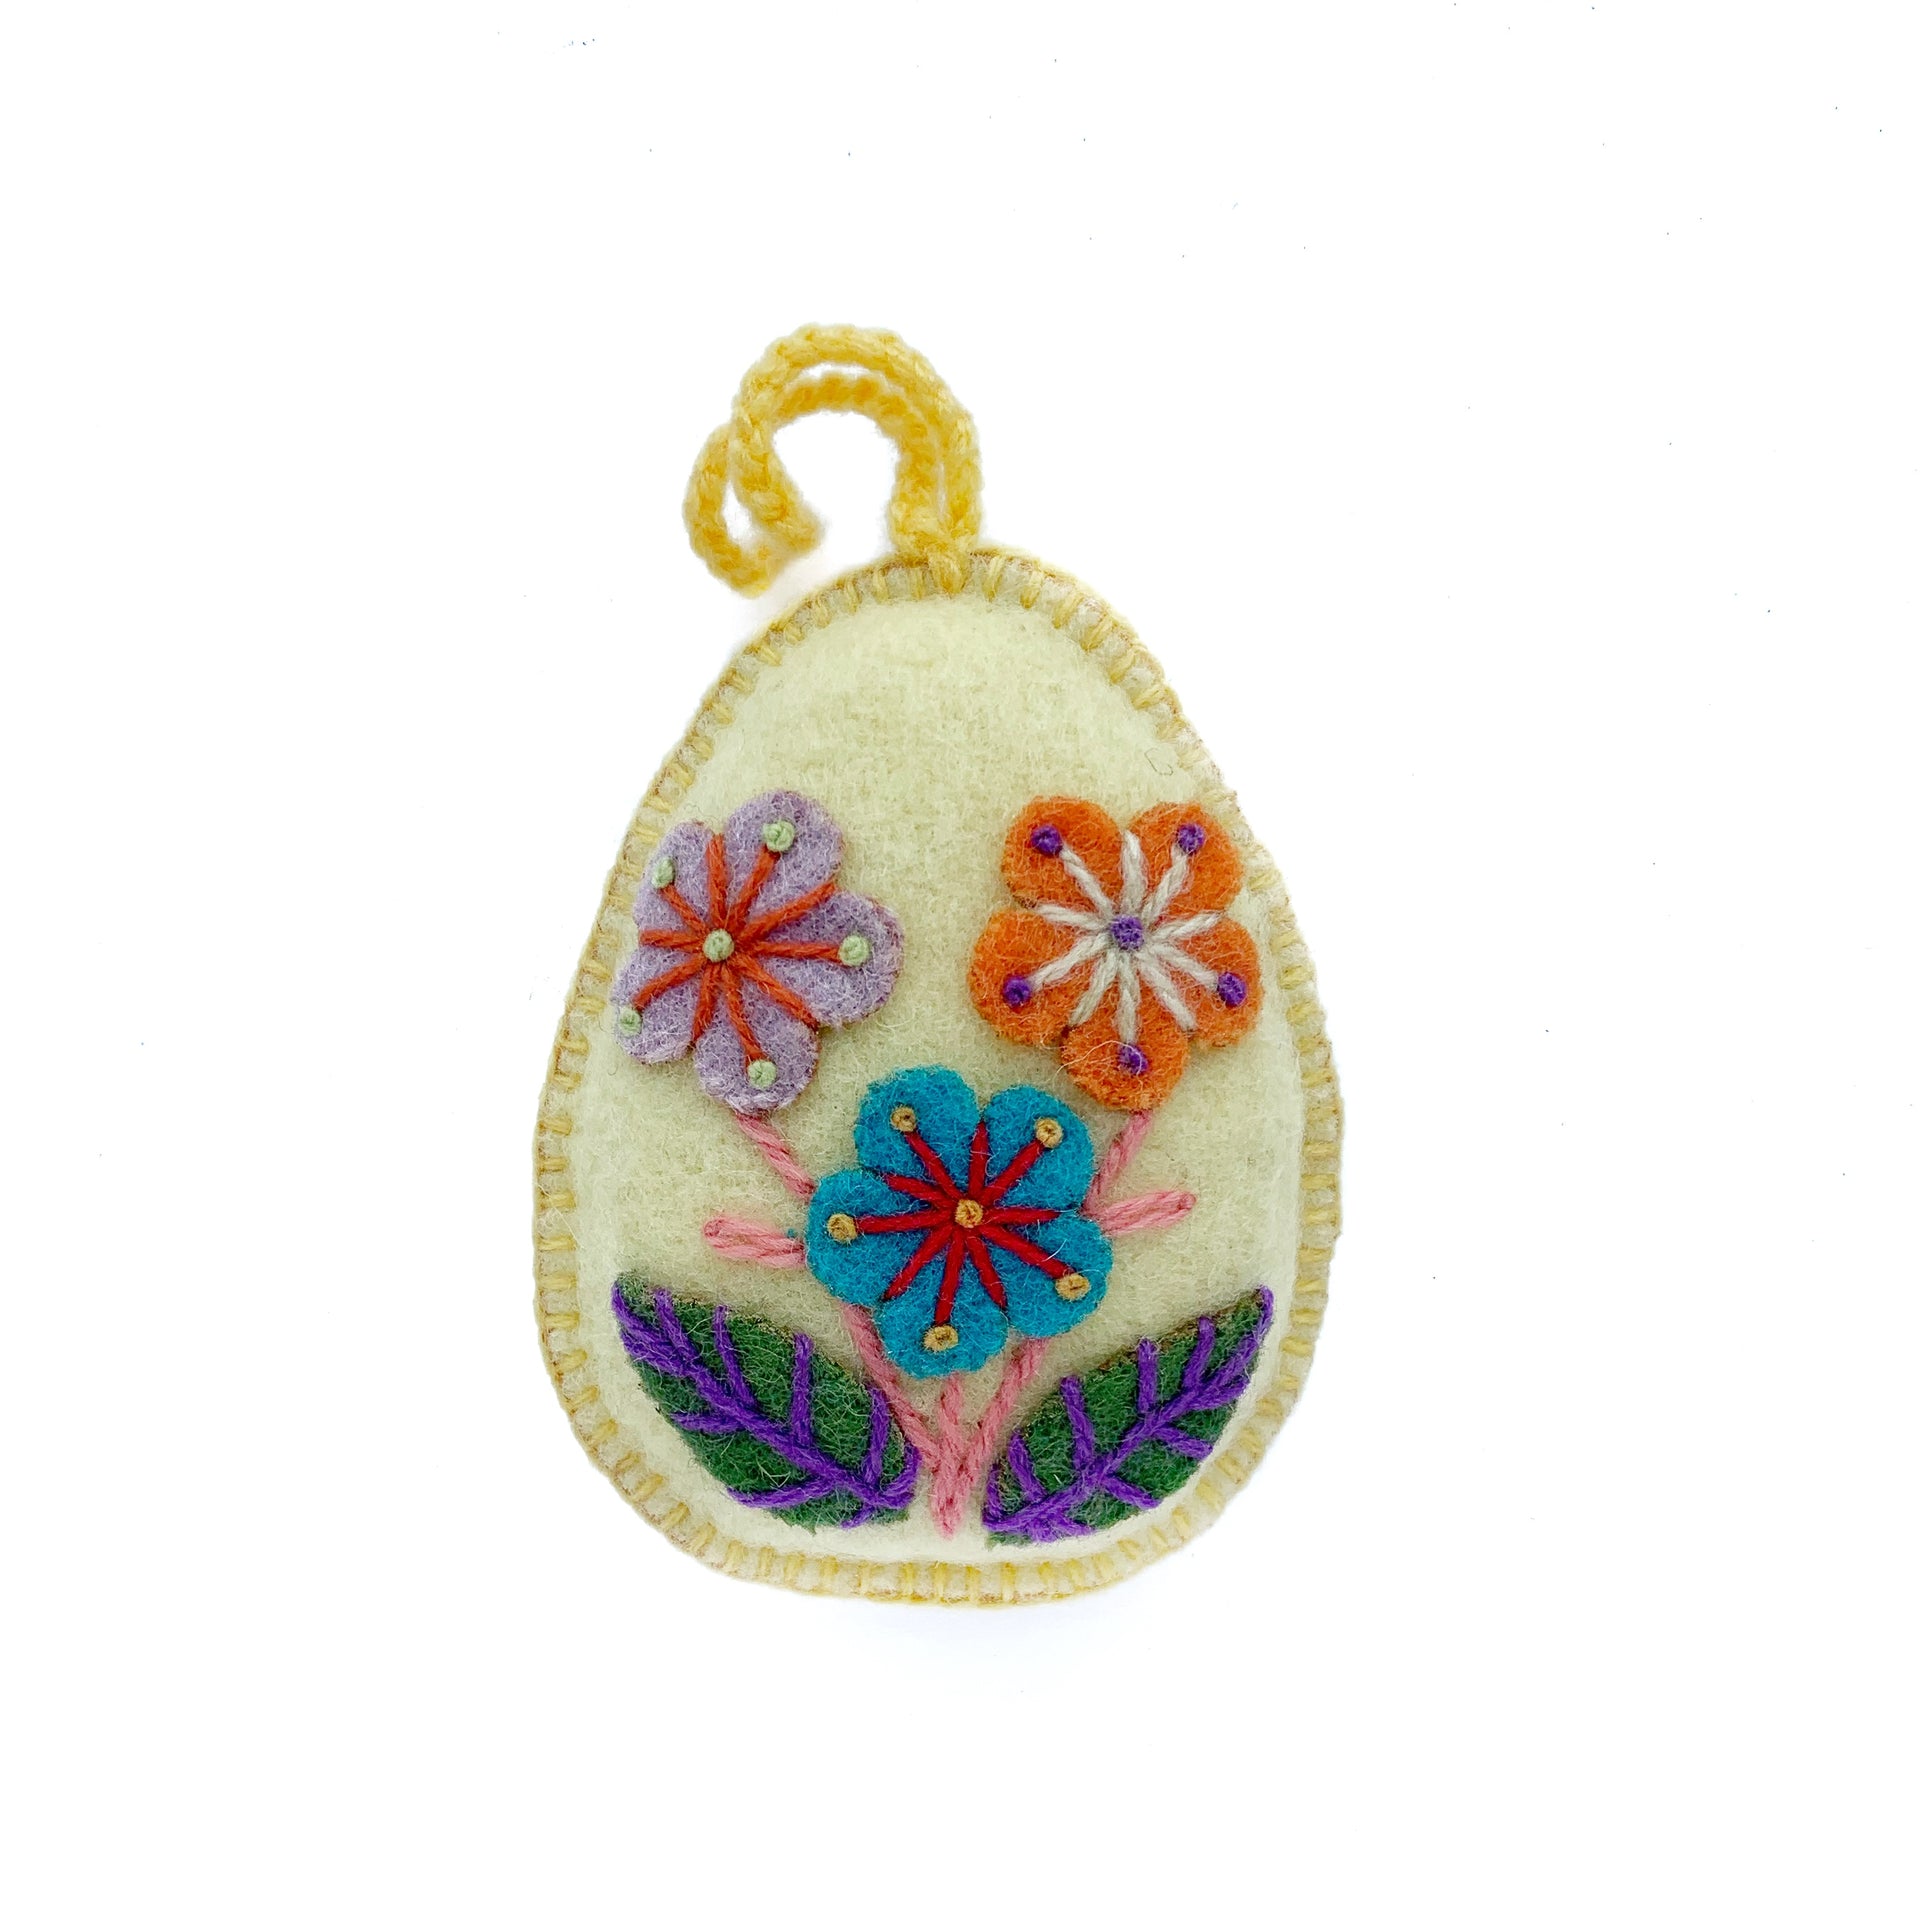 Soft yellow pastel Easter egg ornament with hand embroidered flowers and designs.